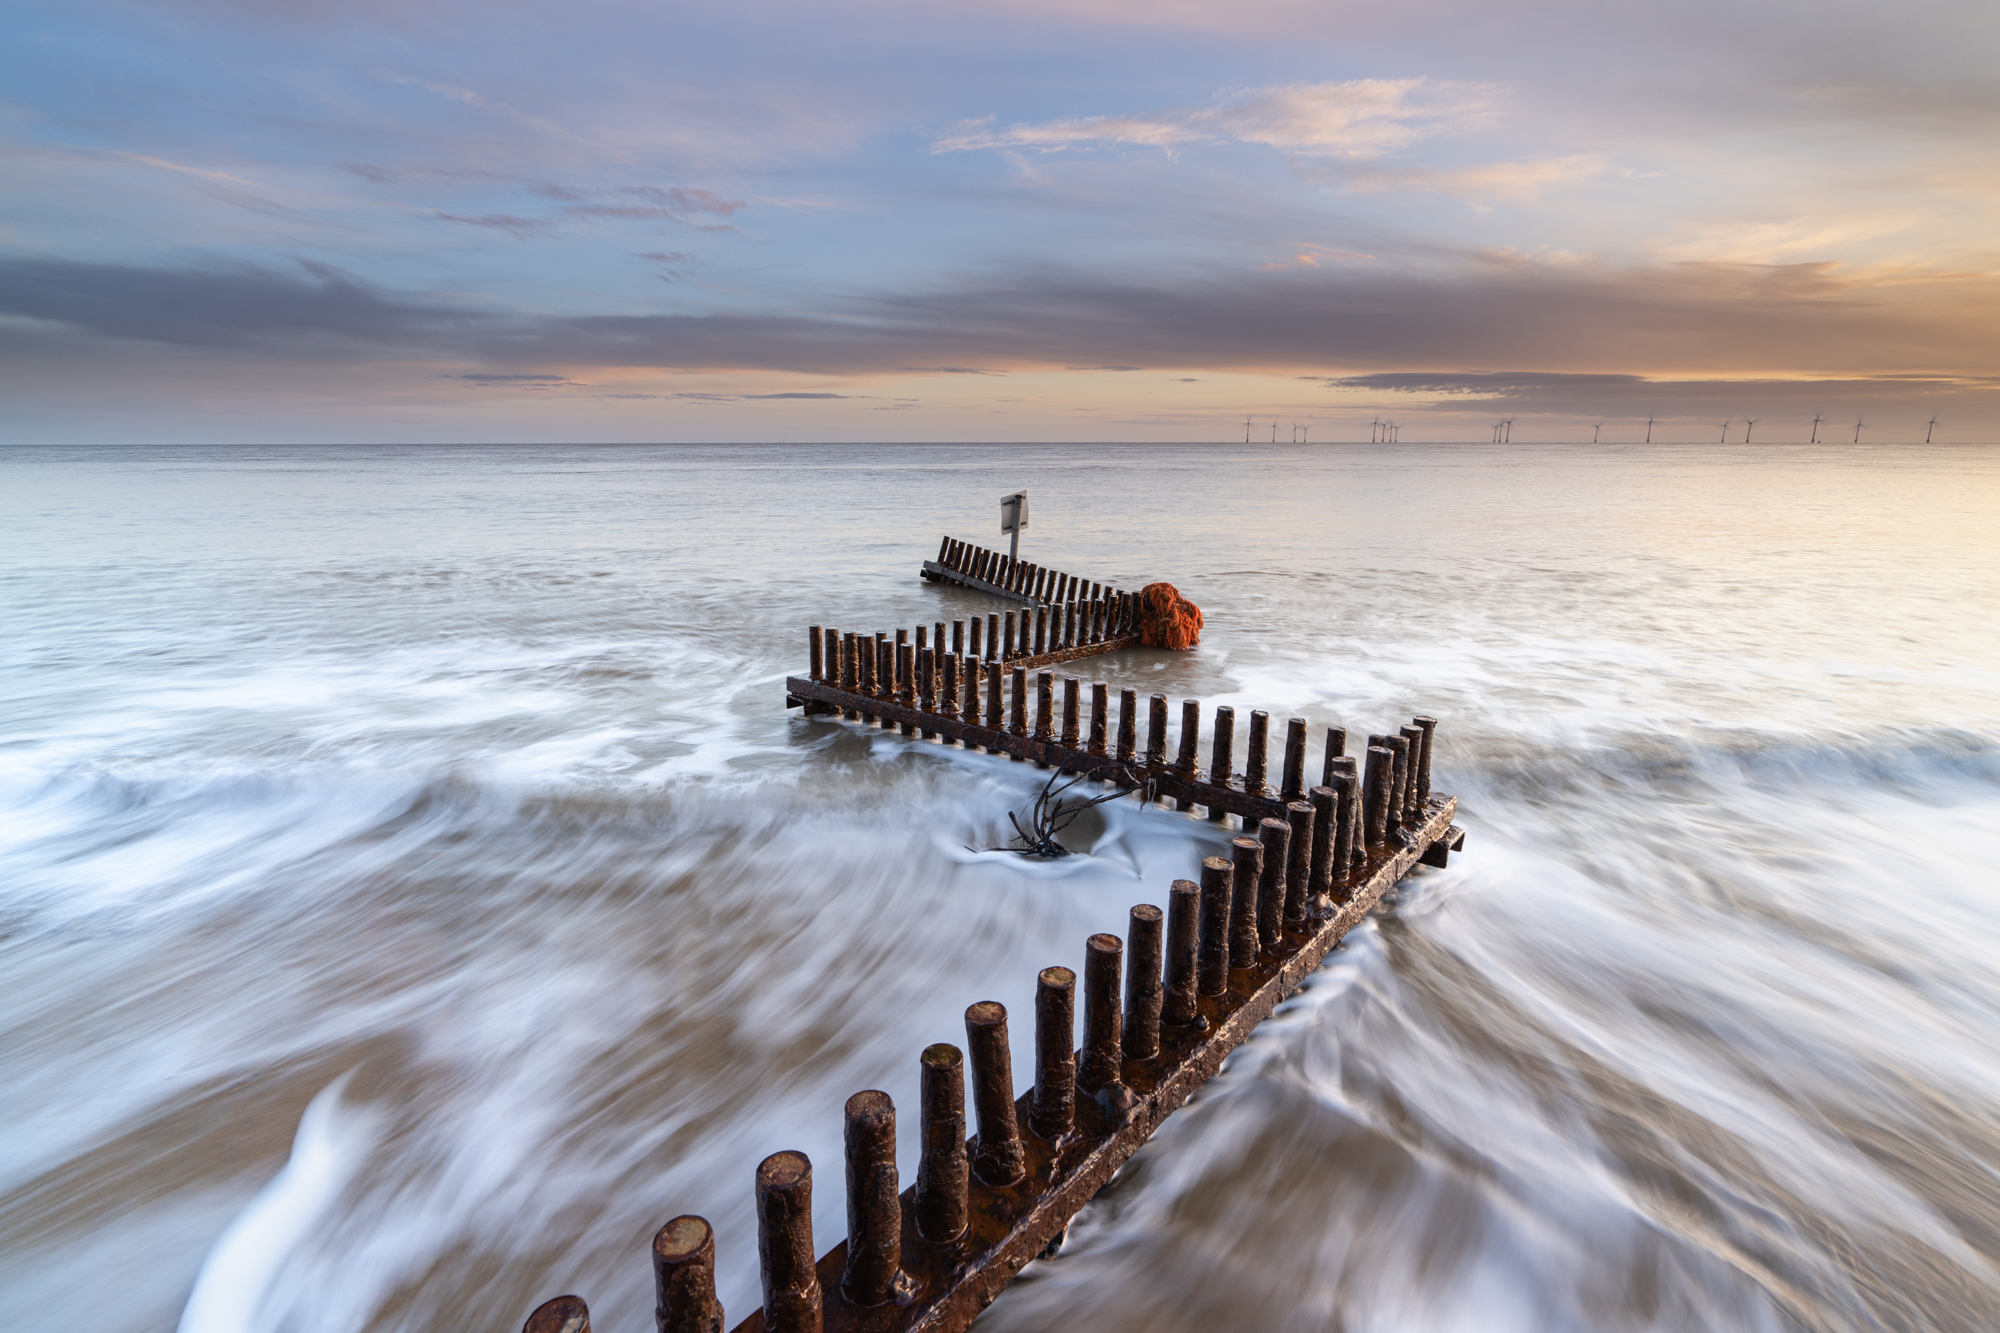 A long exposure seascape taken with the Sony A7R V